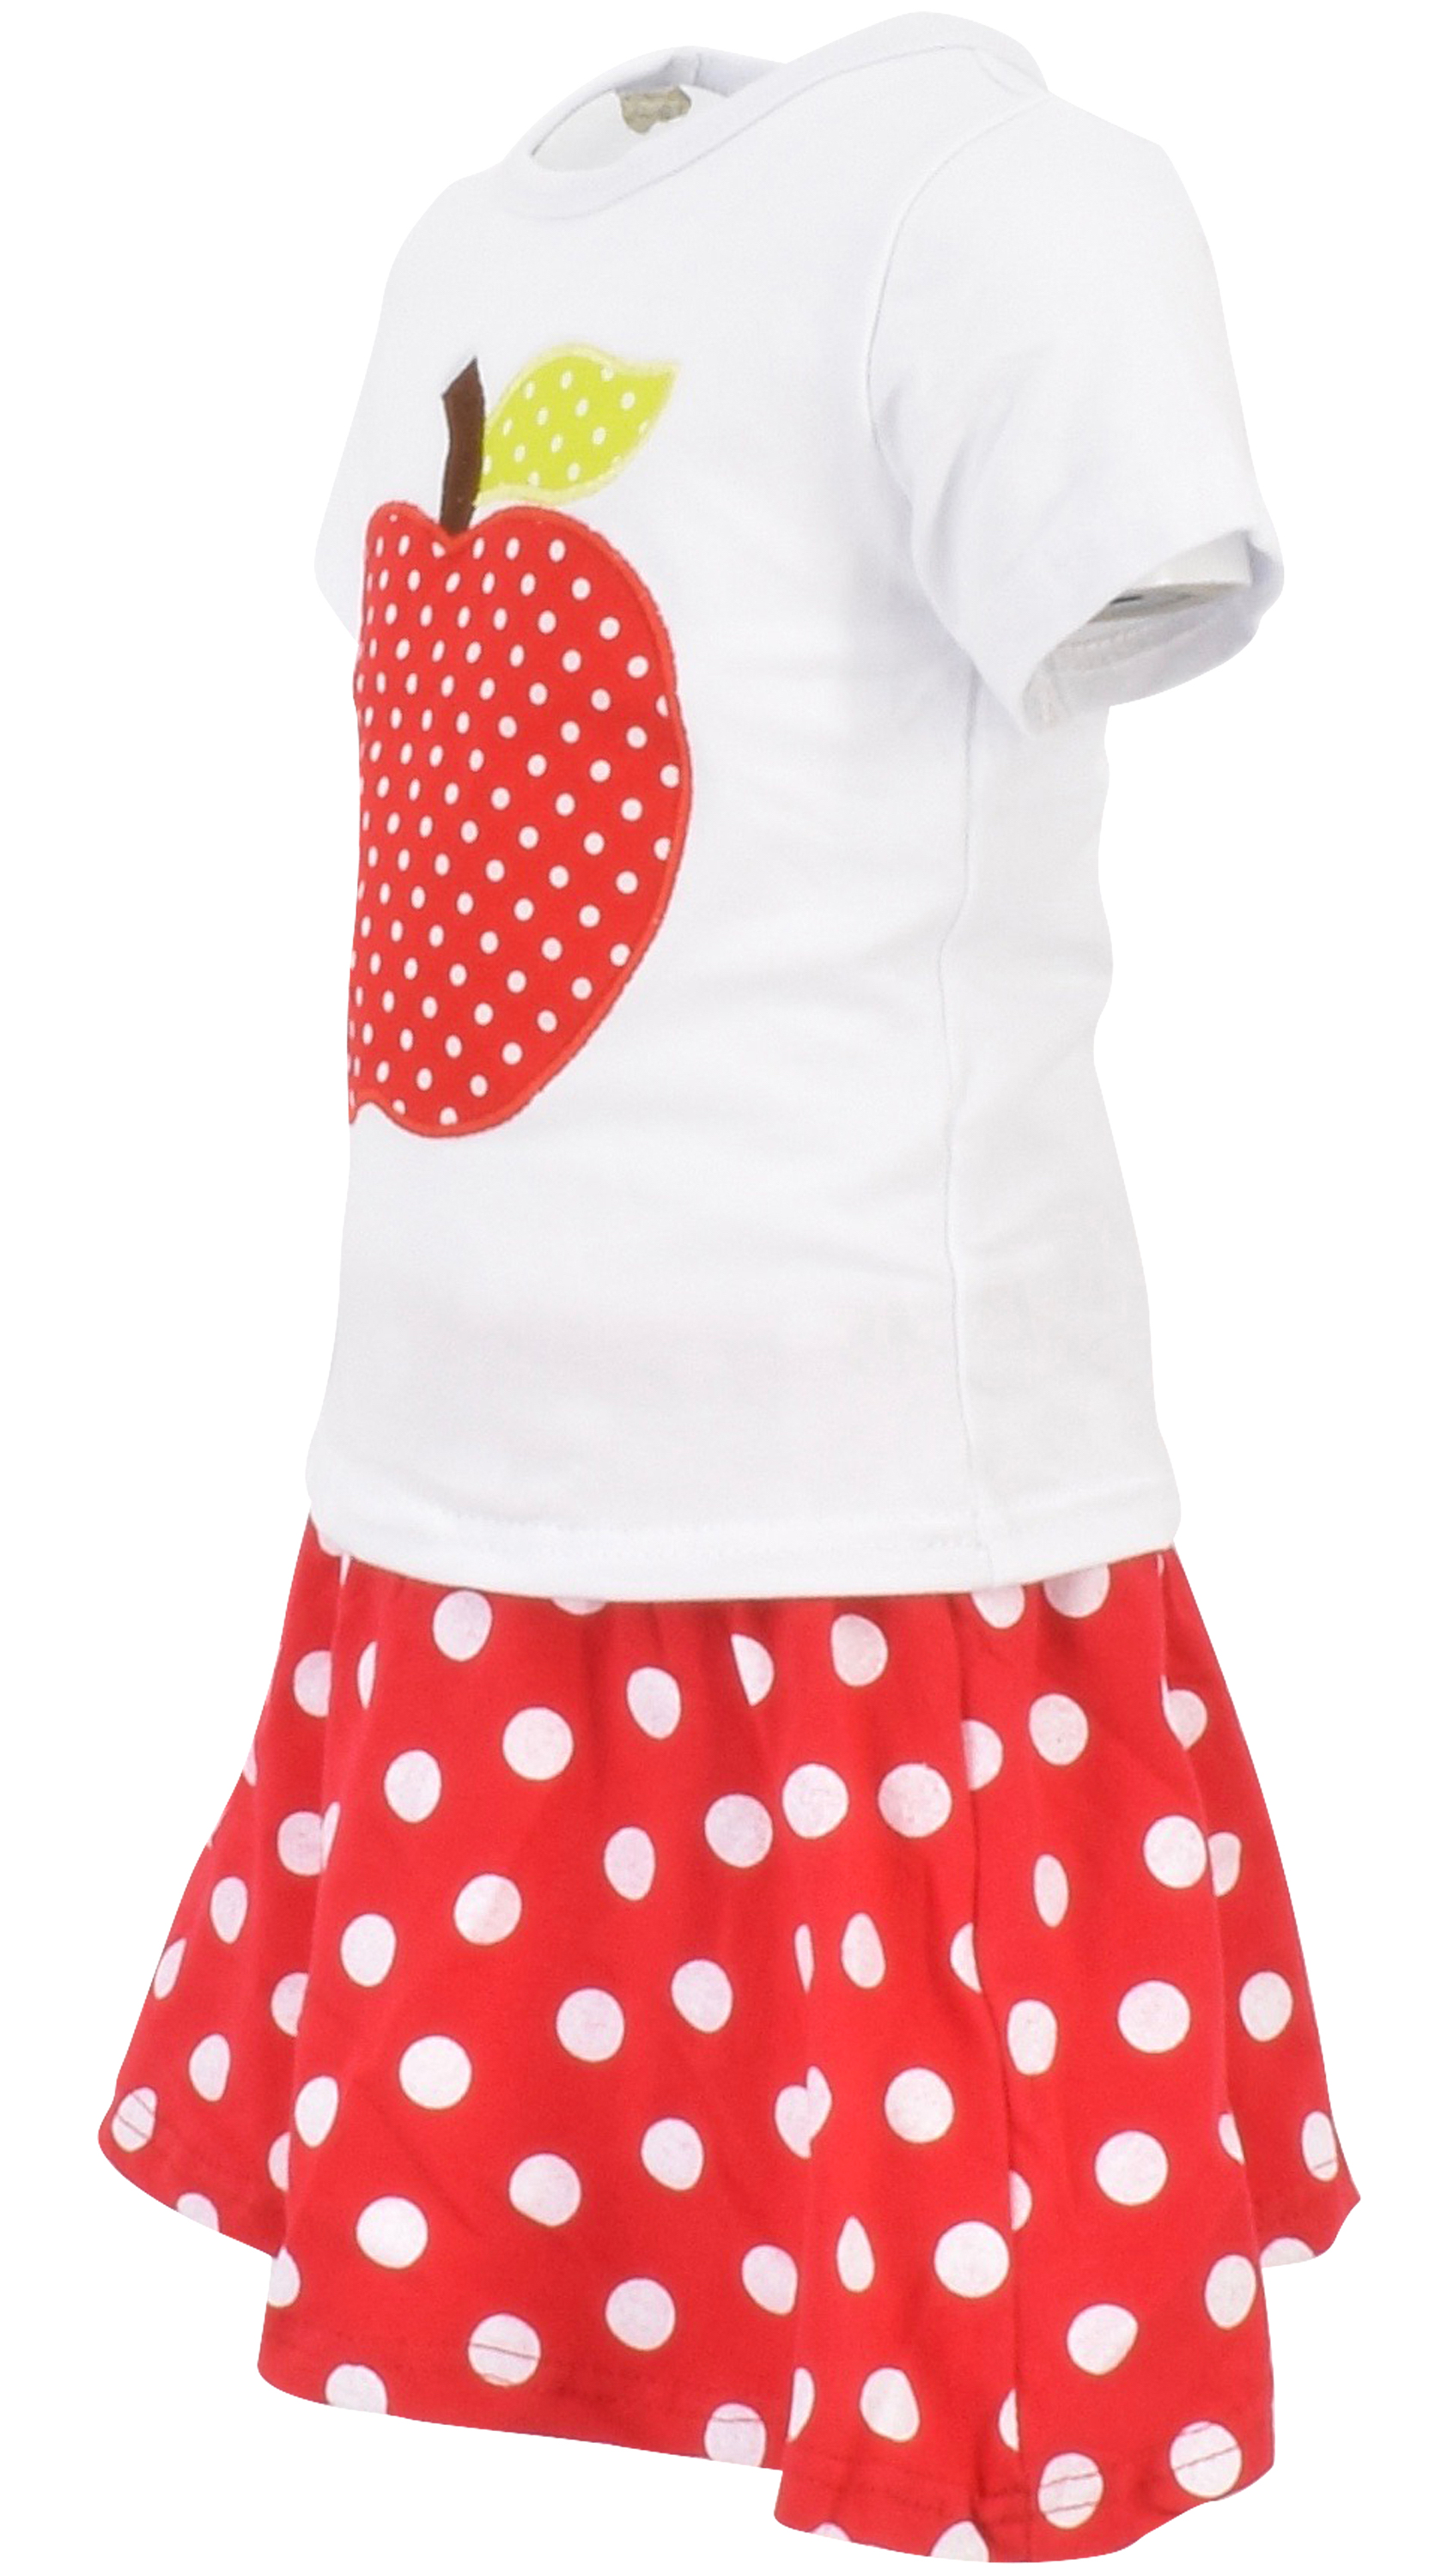 Unique Baby Girls Back to School Apple Skirt Boutique Outfit (5T/L, Red) - image 2 of 4